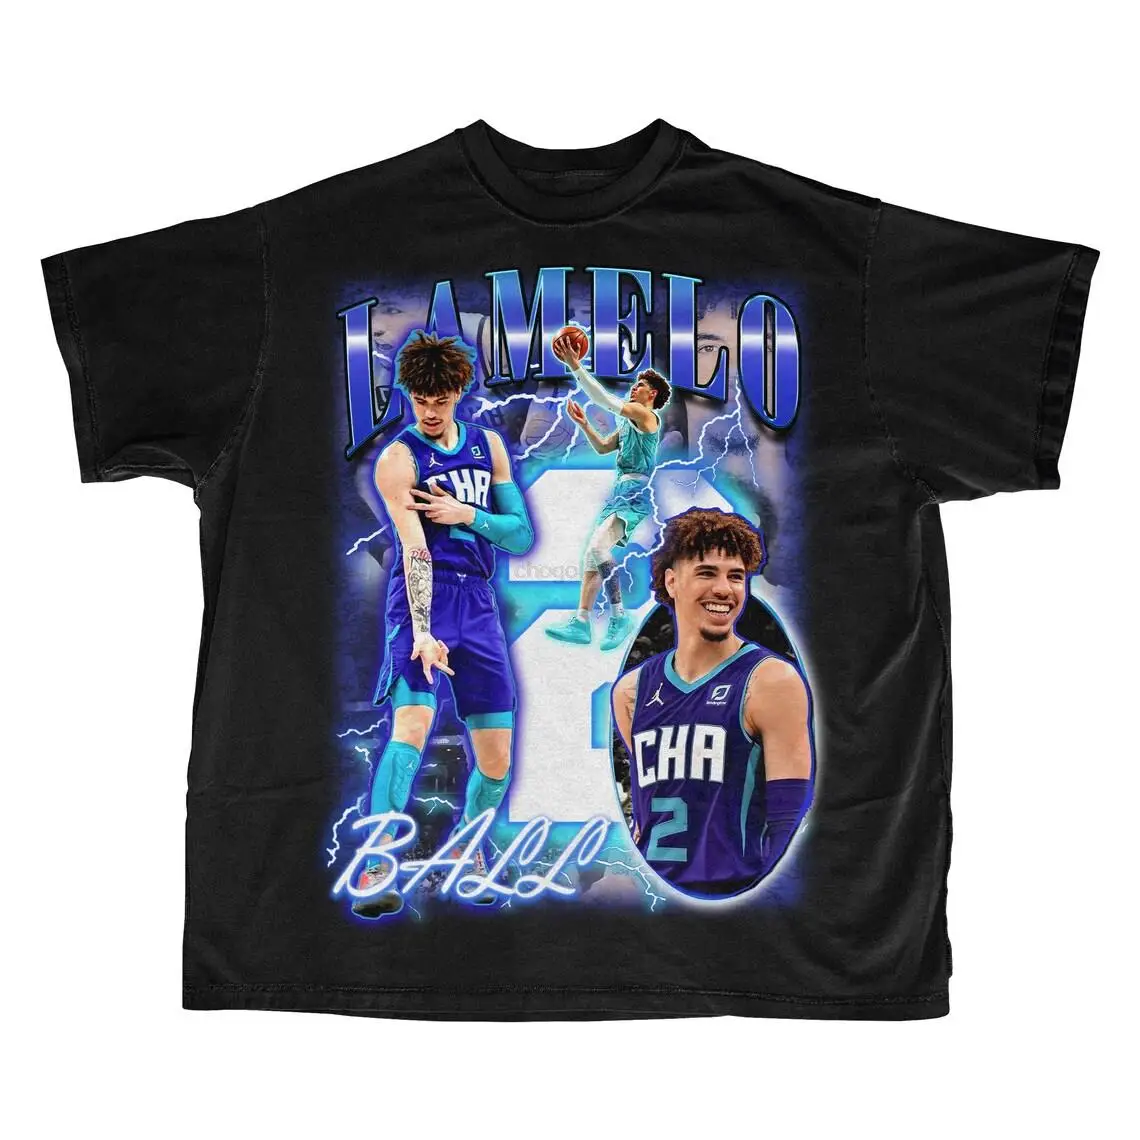 New! Lamelo Ball T-shirt Tee All Size S to 4XL LLL653 - AliExpress